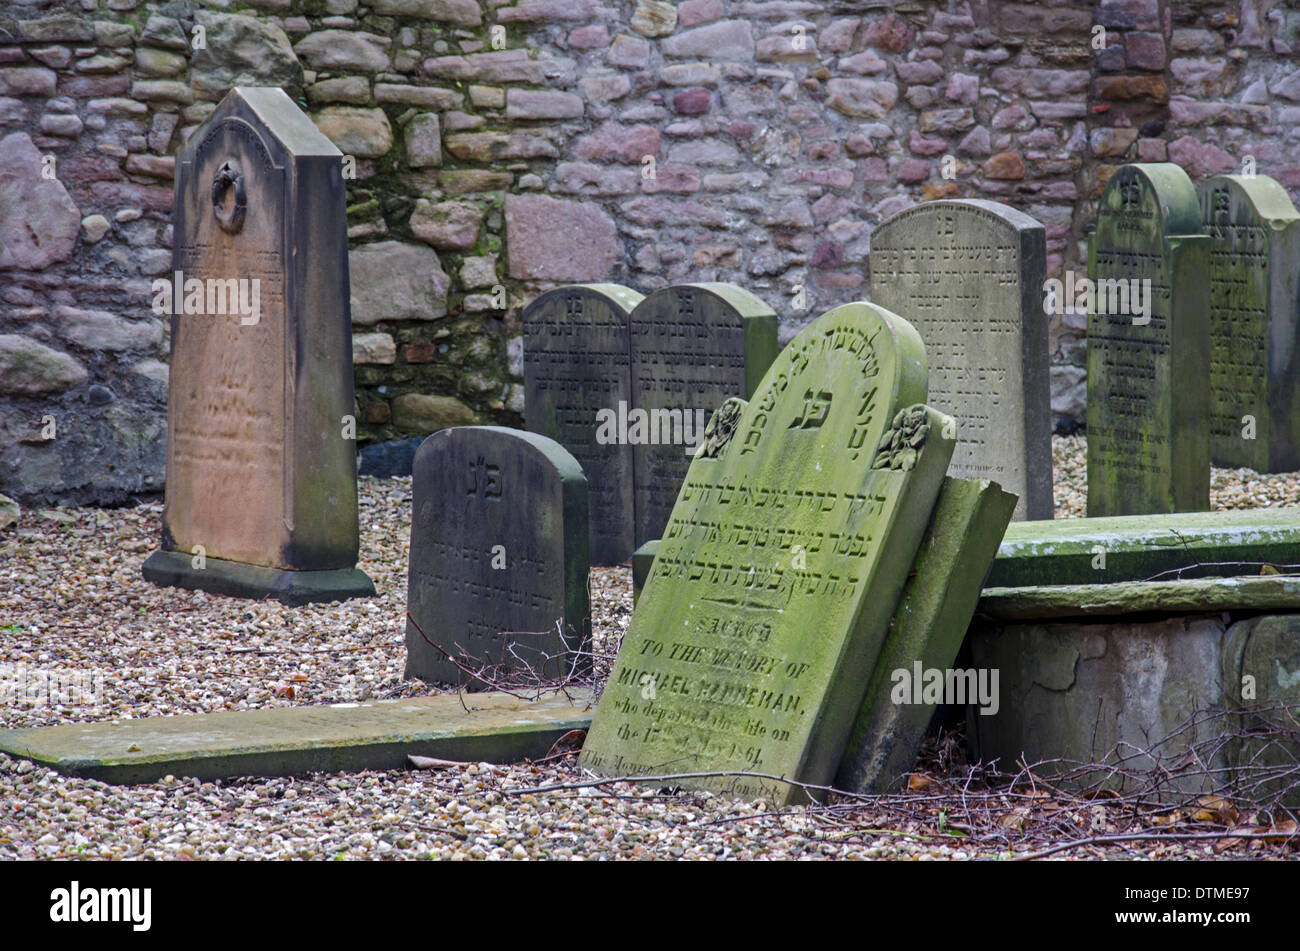 Worn and weathered Jewish headstones in what was the first Jewish Burial Ground in Scotland, opened in 1816. Stock Photo